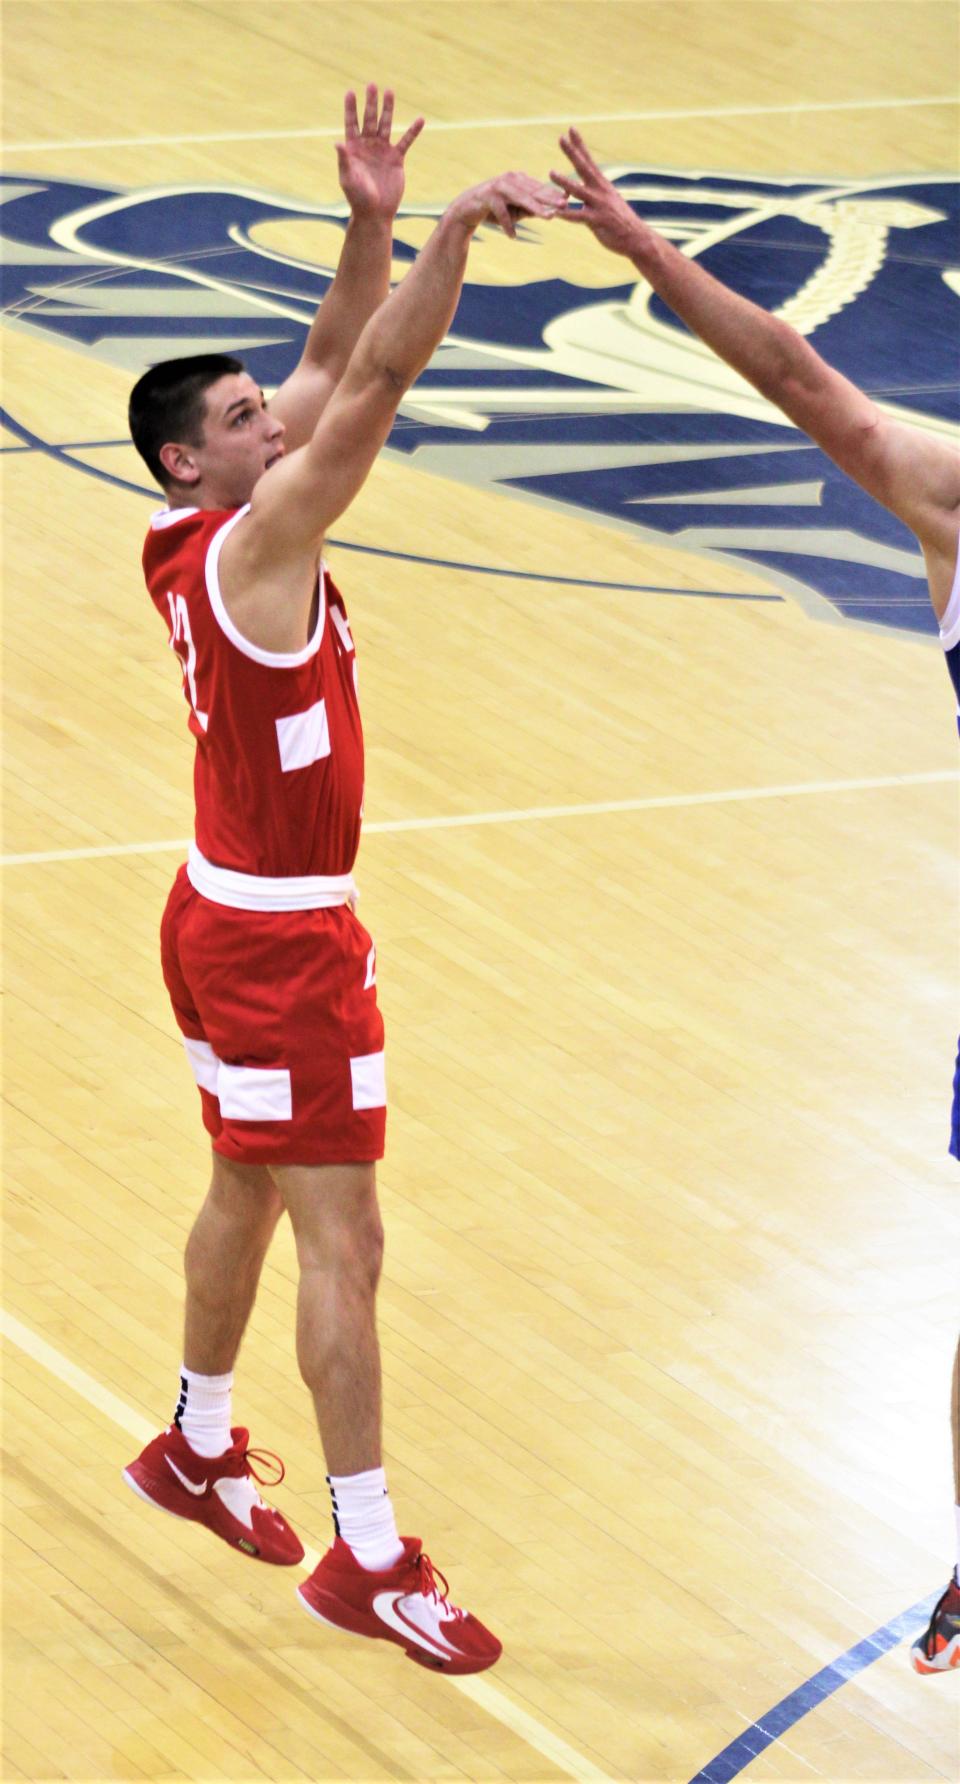 Nathan Dudukovich of Lakota West hits a 3-pointer as Kentucky defeated Ohio 93-83 in the boys edition of the Ohio-Kentucky All-Star Game April 8, 2023, at Thomas More University's Connor Convocation Center.